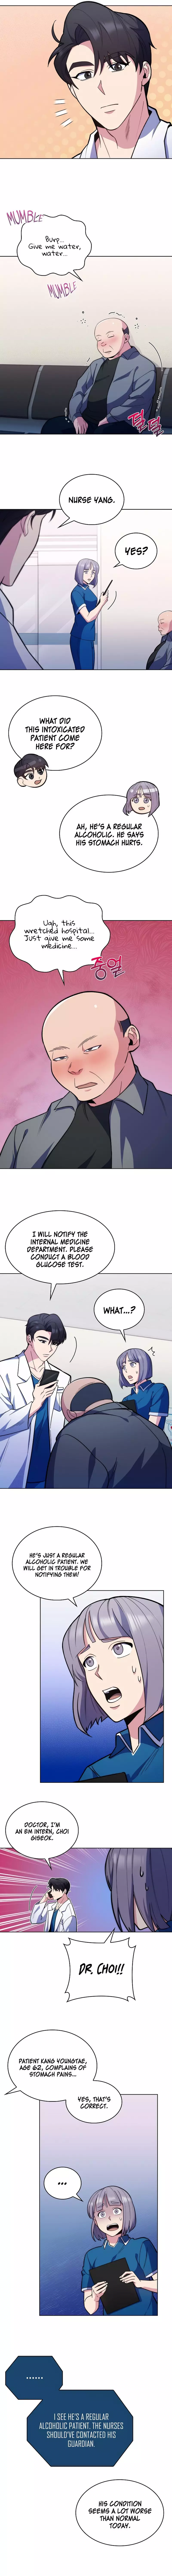 Level-Up Doctor (Manhwa) - 19 page 4-74a02ca4